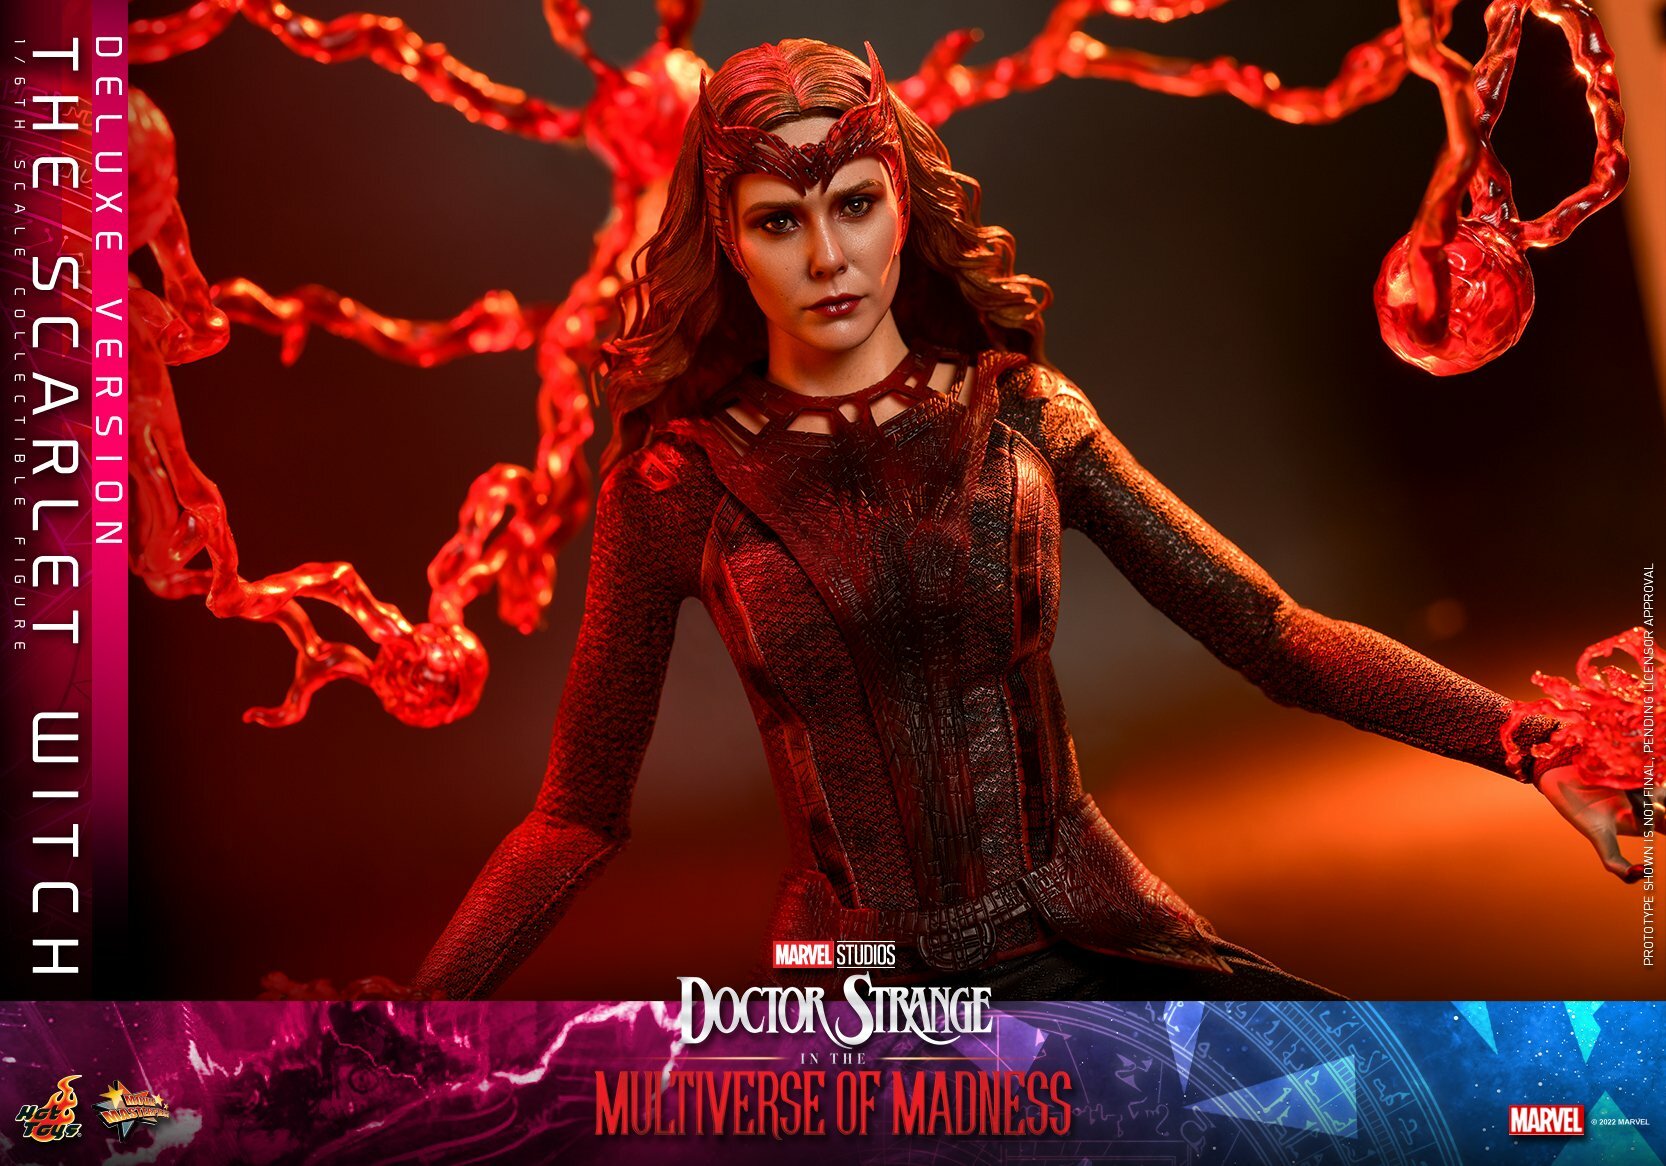 Hot-Toy-Multiverse-of-Madness-Scarlet-Witch-DX-015.jpg.67c7e5e01d554af0b928aa029f89d292.jpg